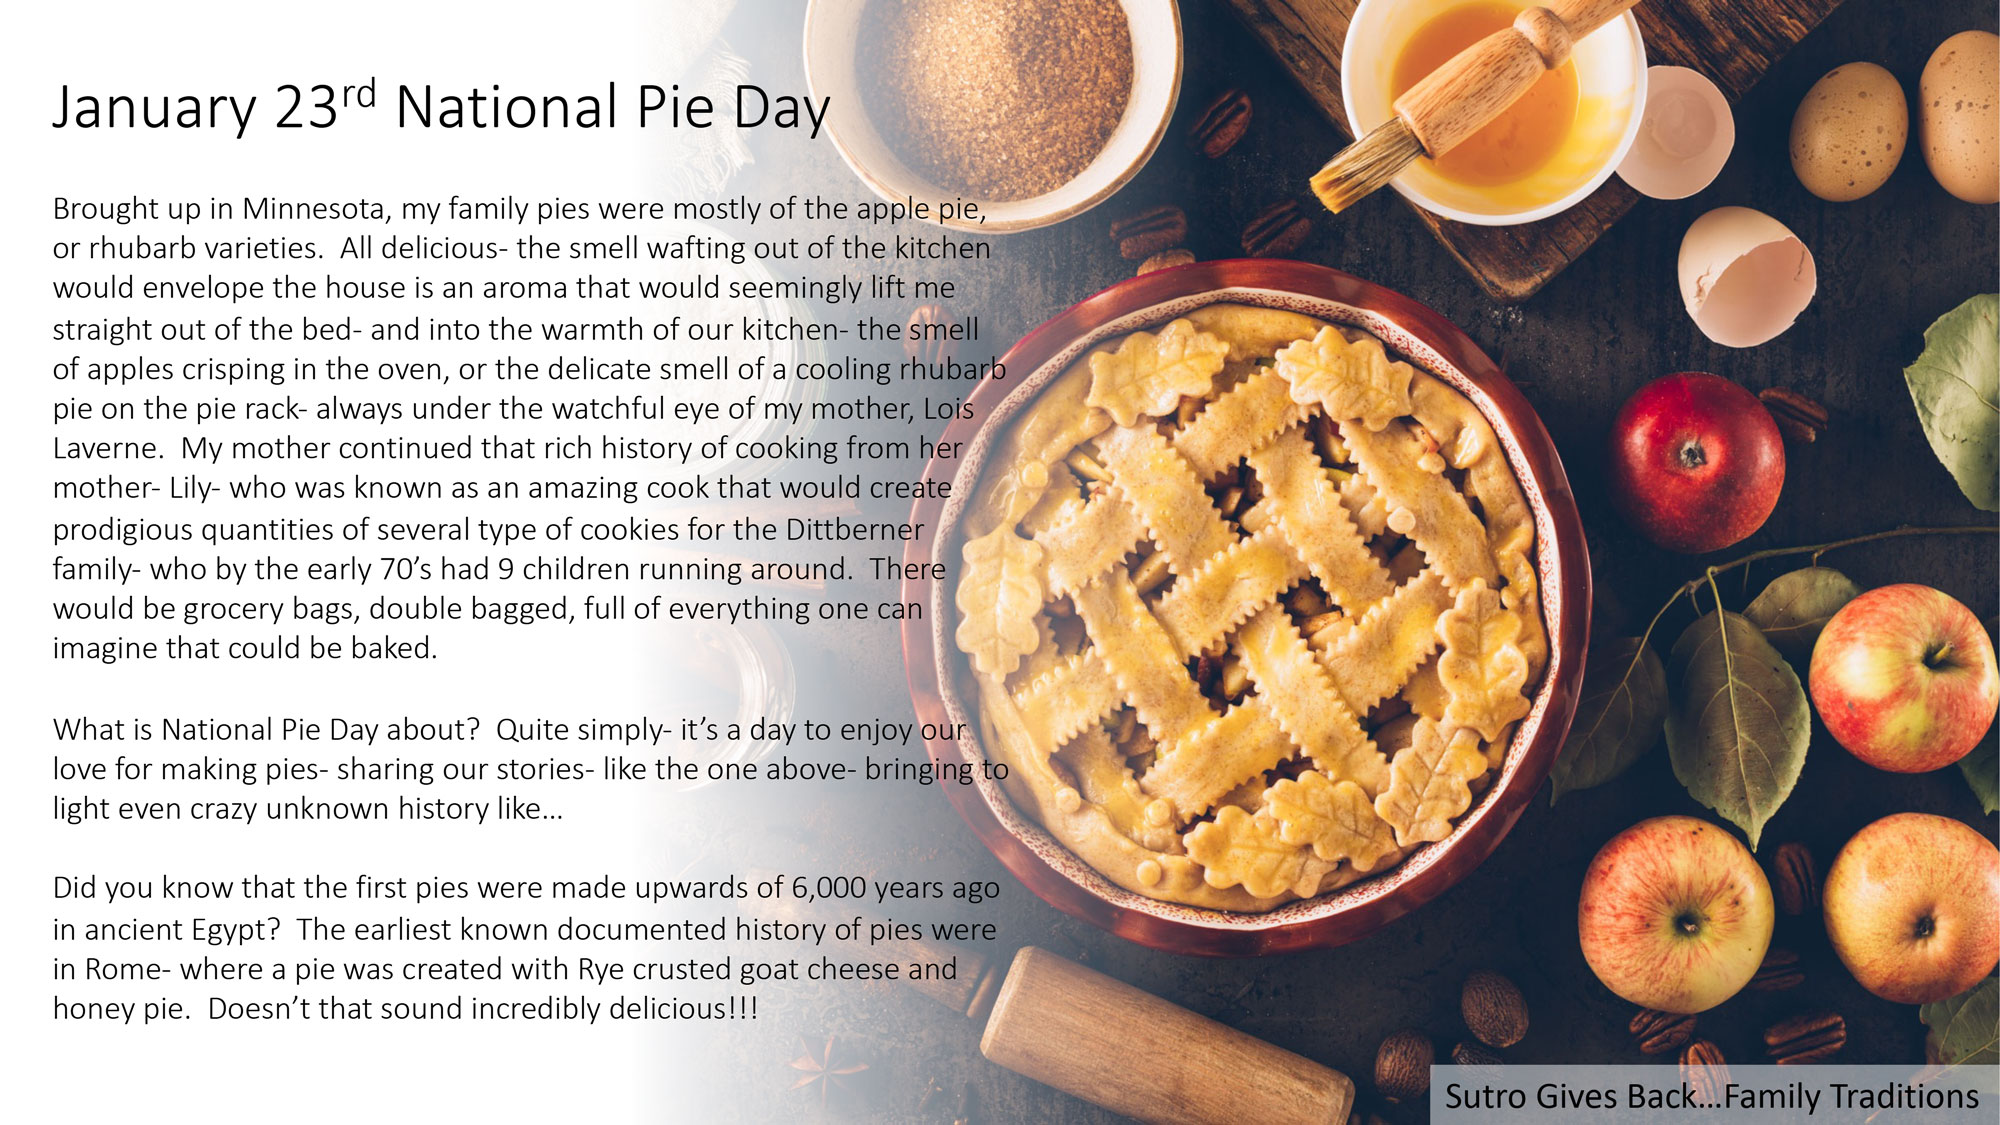 January 23rd National Pie Day